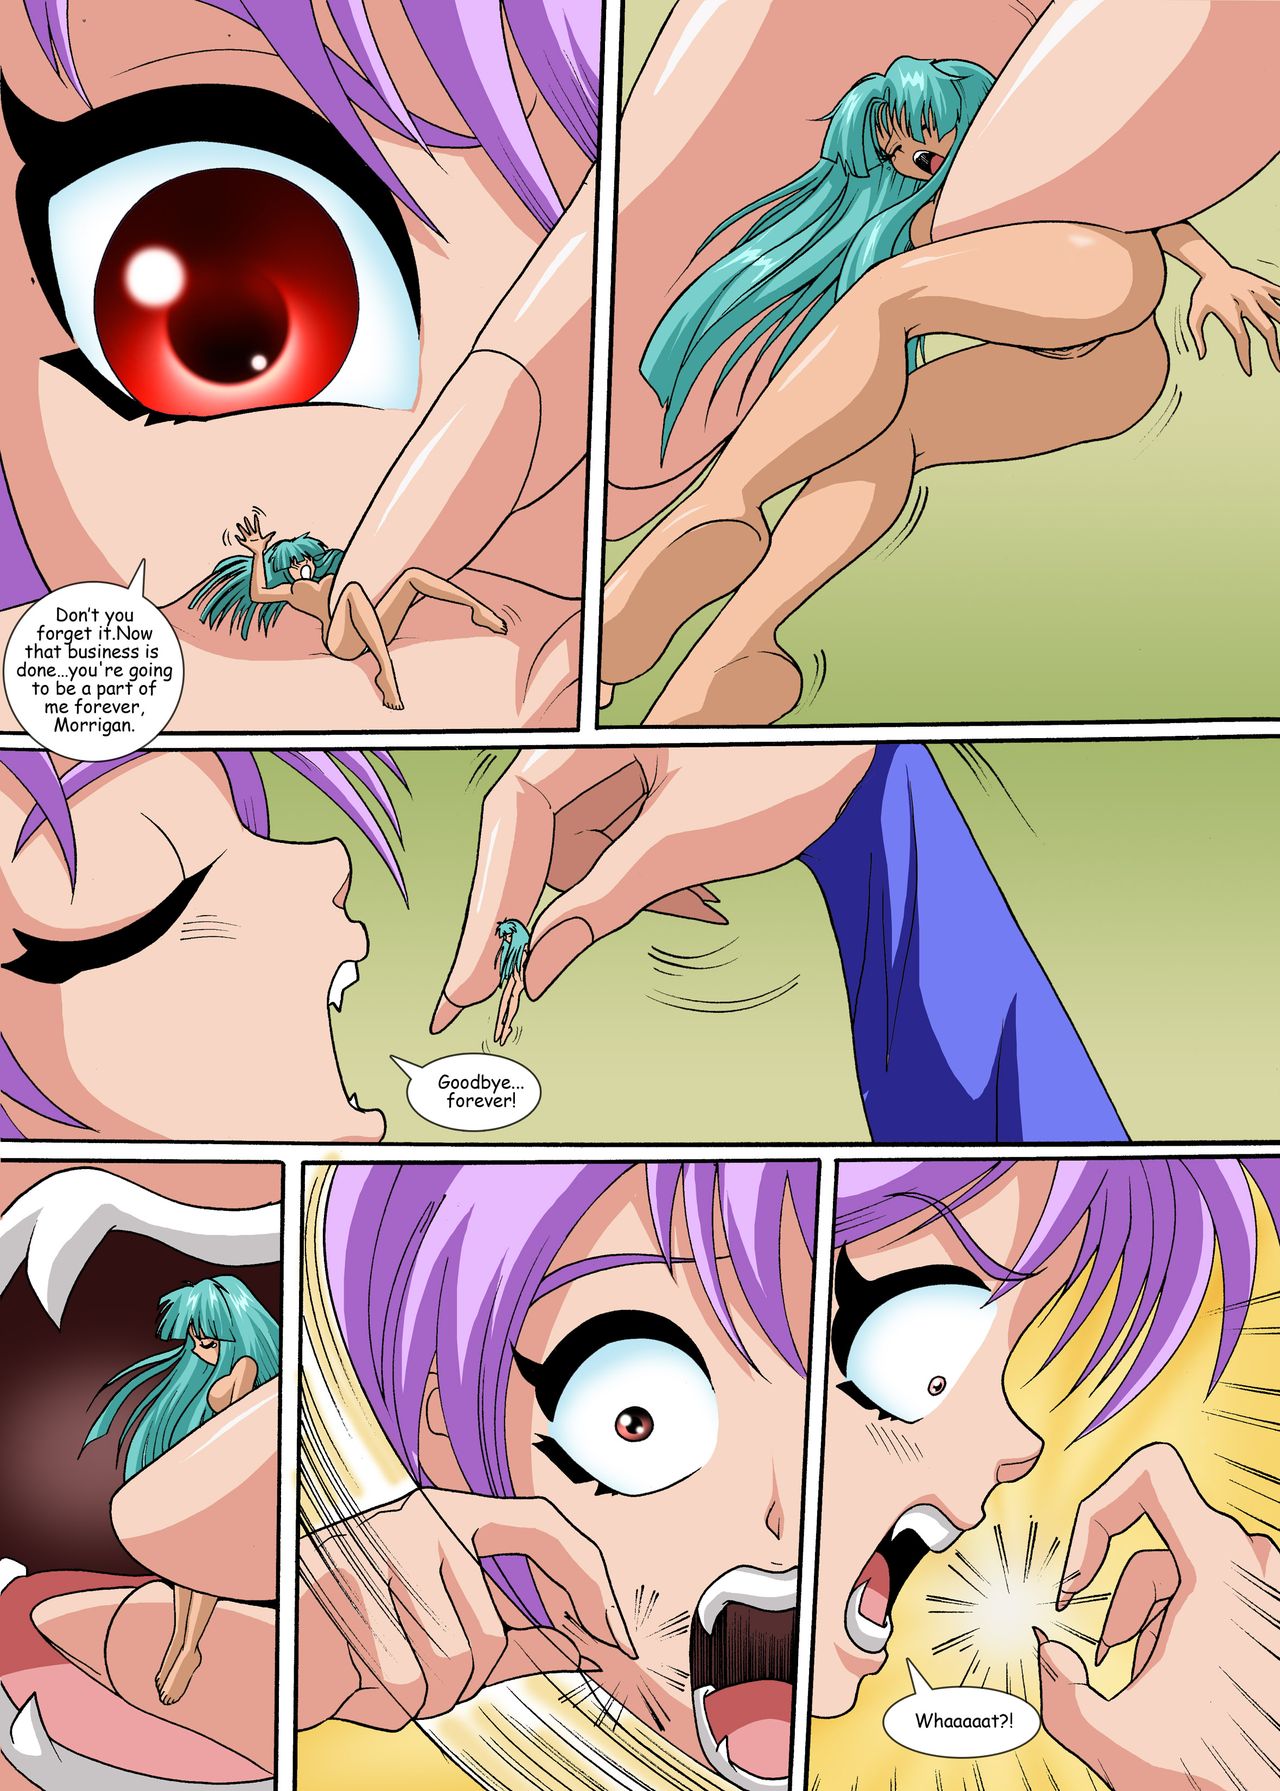 The Shrinking Succubus (Darkstalkers) by Palcomix.